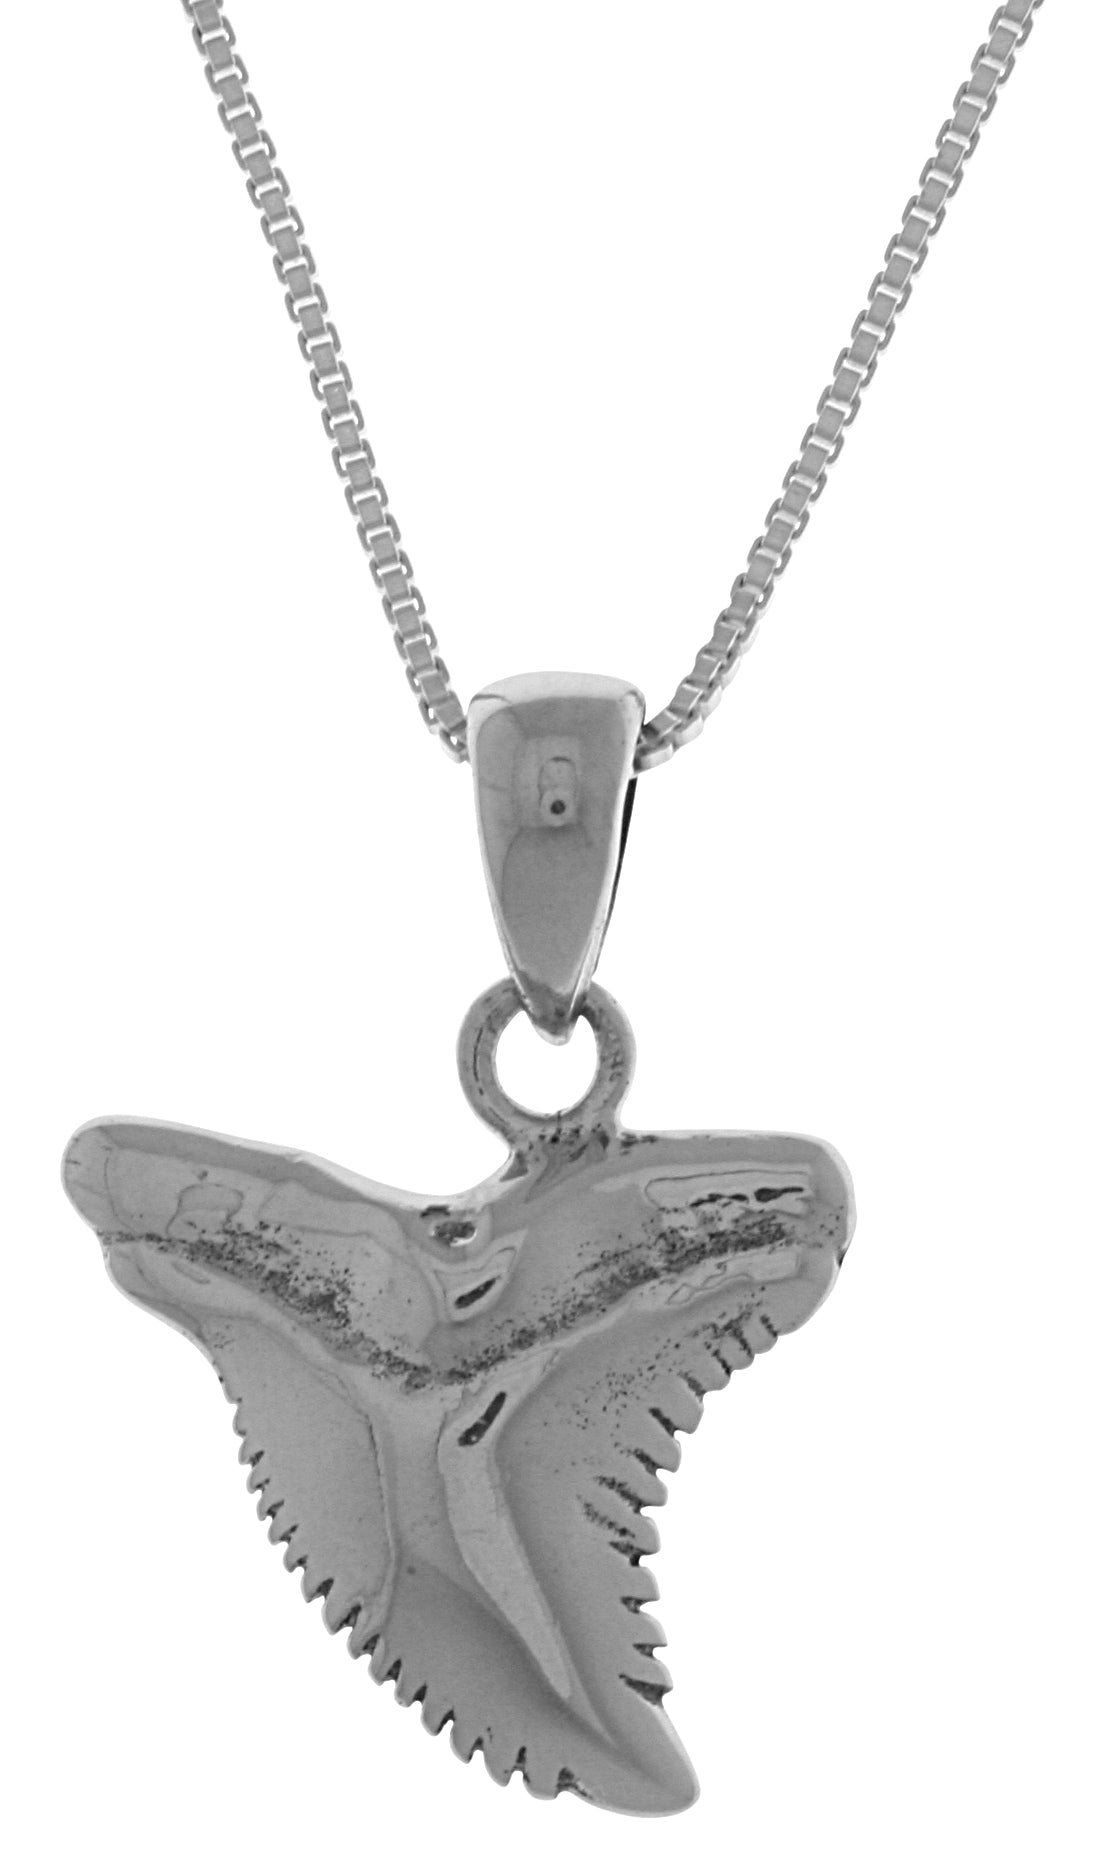 Jewelry Trends Sterling Silver Shark Tooth Pendant on 18 Inch Box Chain Necklace